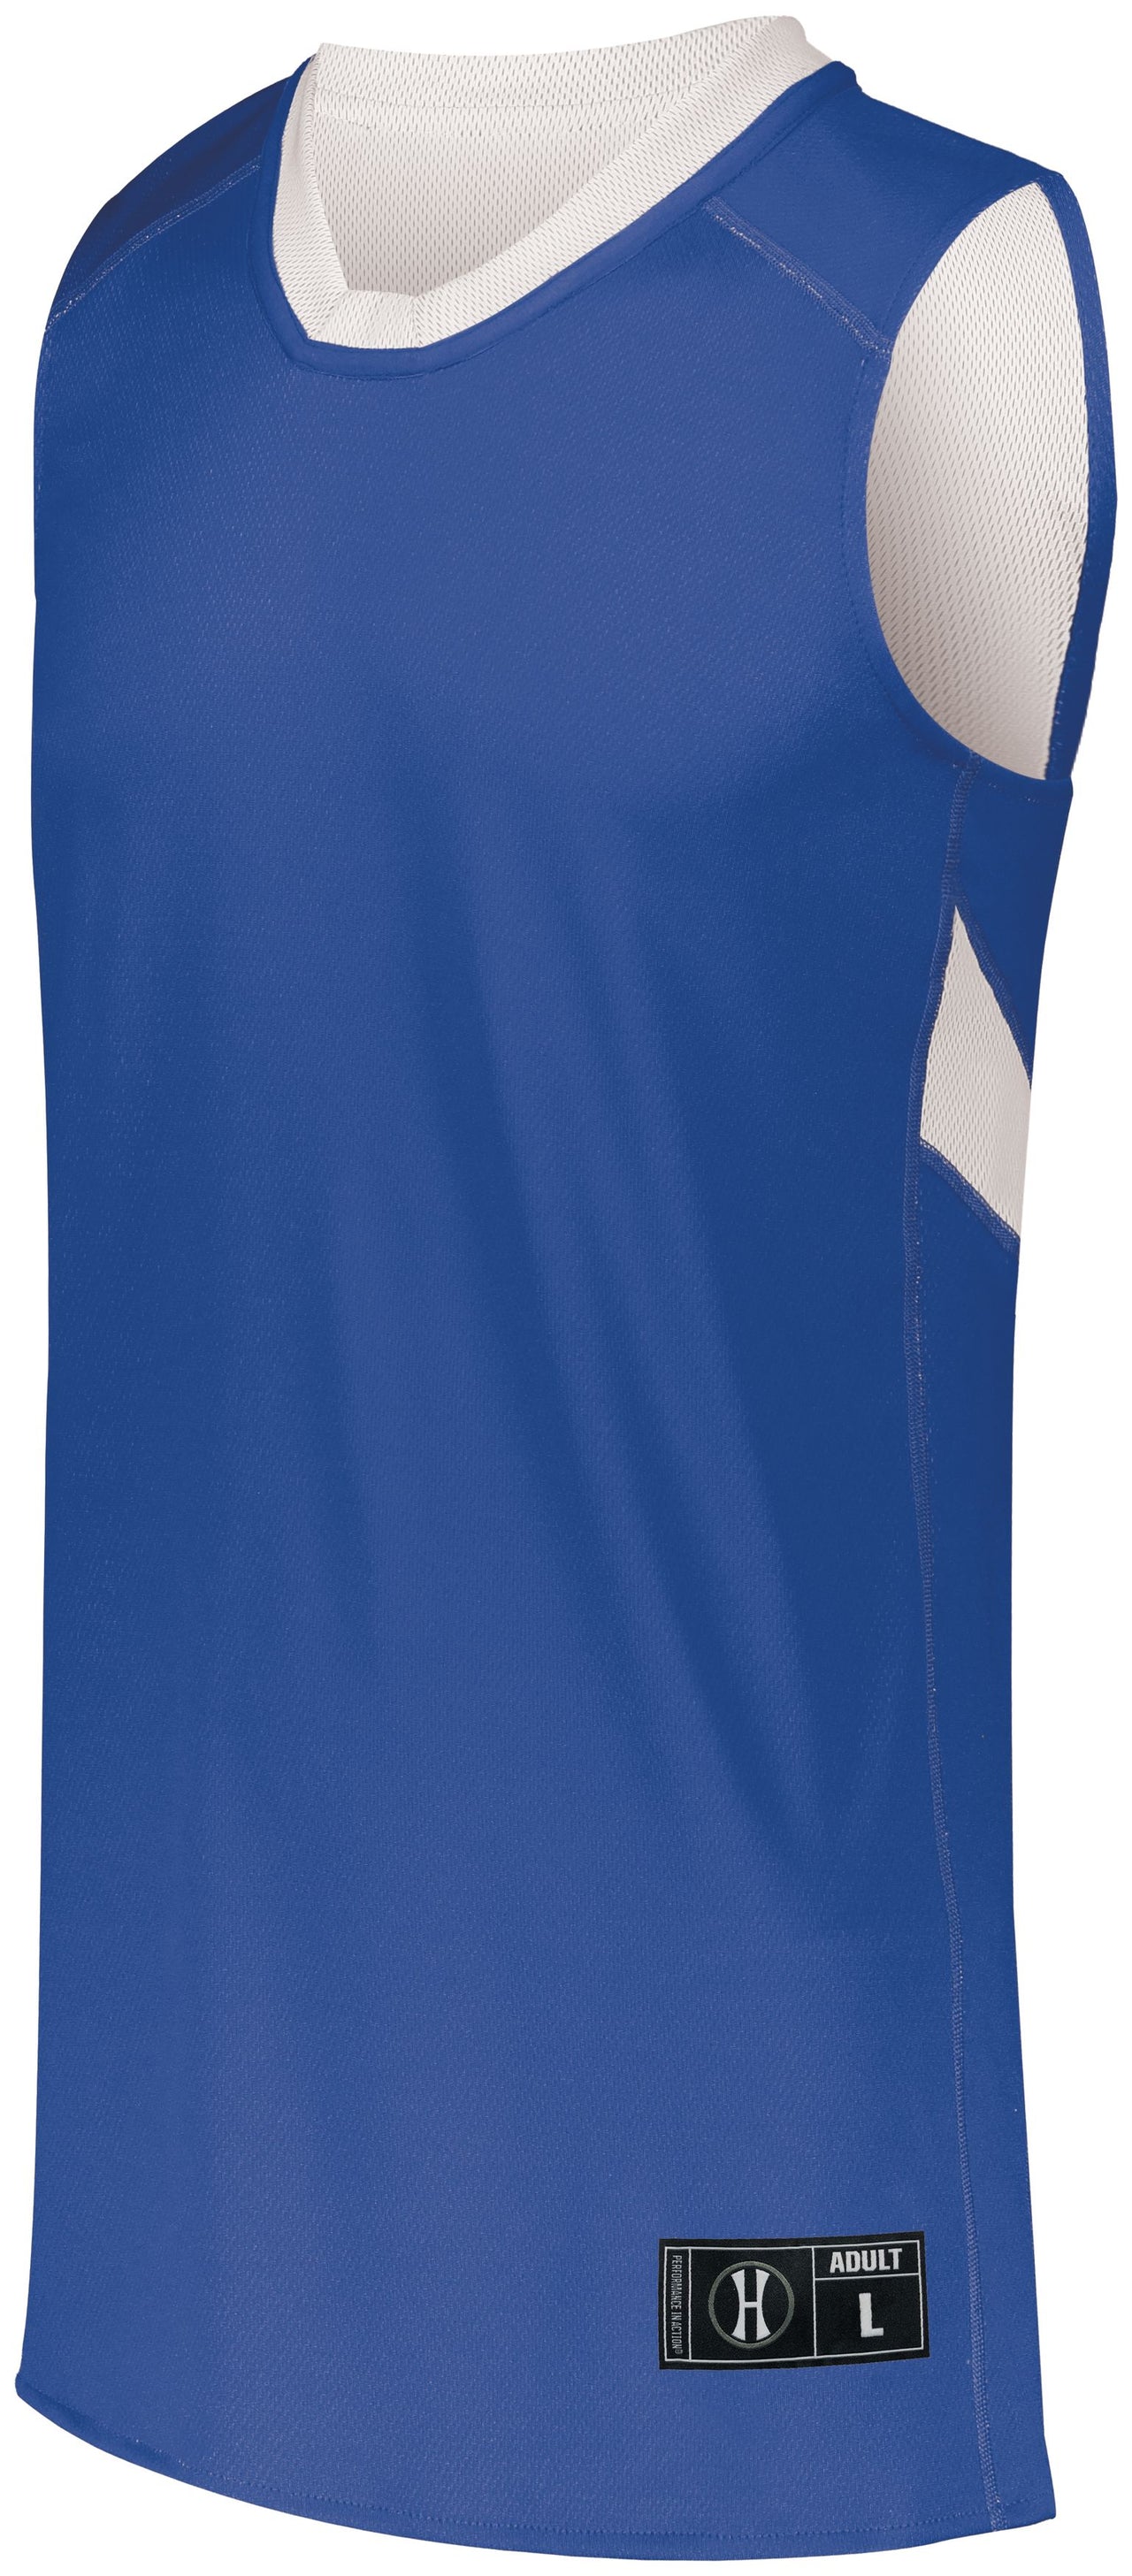 Youth Dual-Side Single Ply Basketball Jersey - 224278